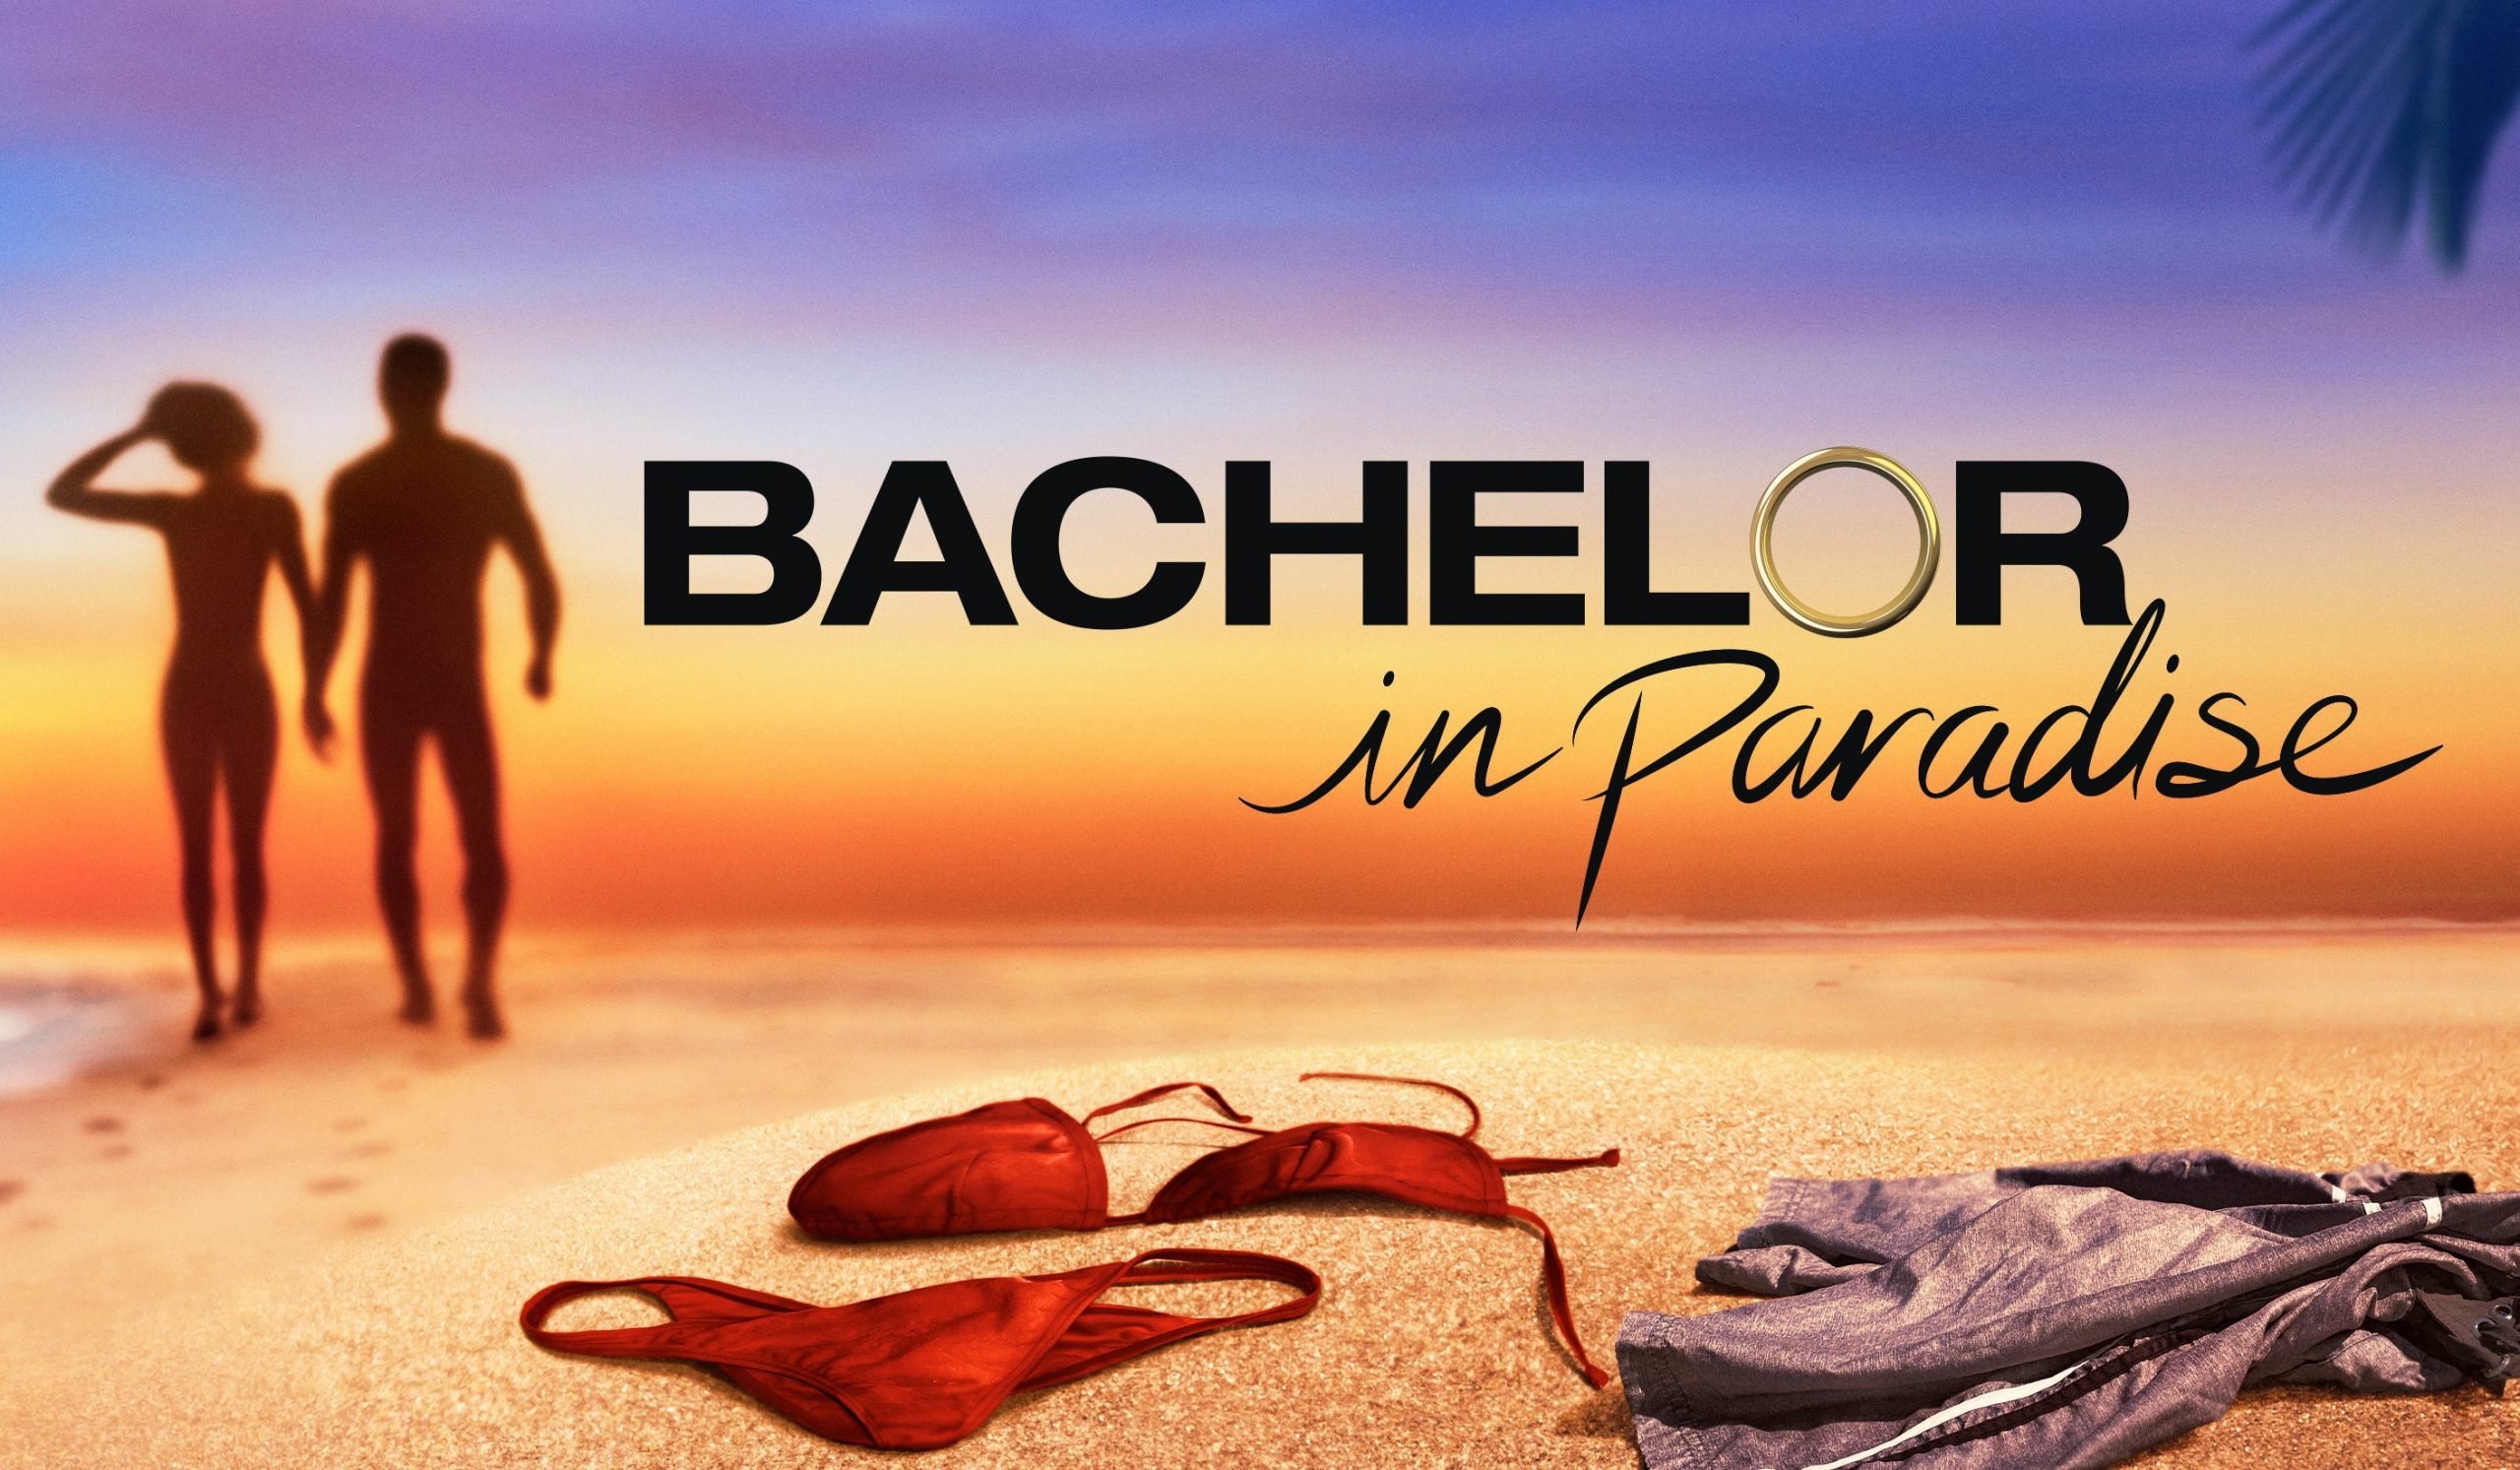 Key art for 'Bachelor in Paradise' Season 7 for our article about 2022 spoilers. It features the show's logo, a beach, and bathing suits in the sand.